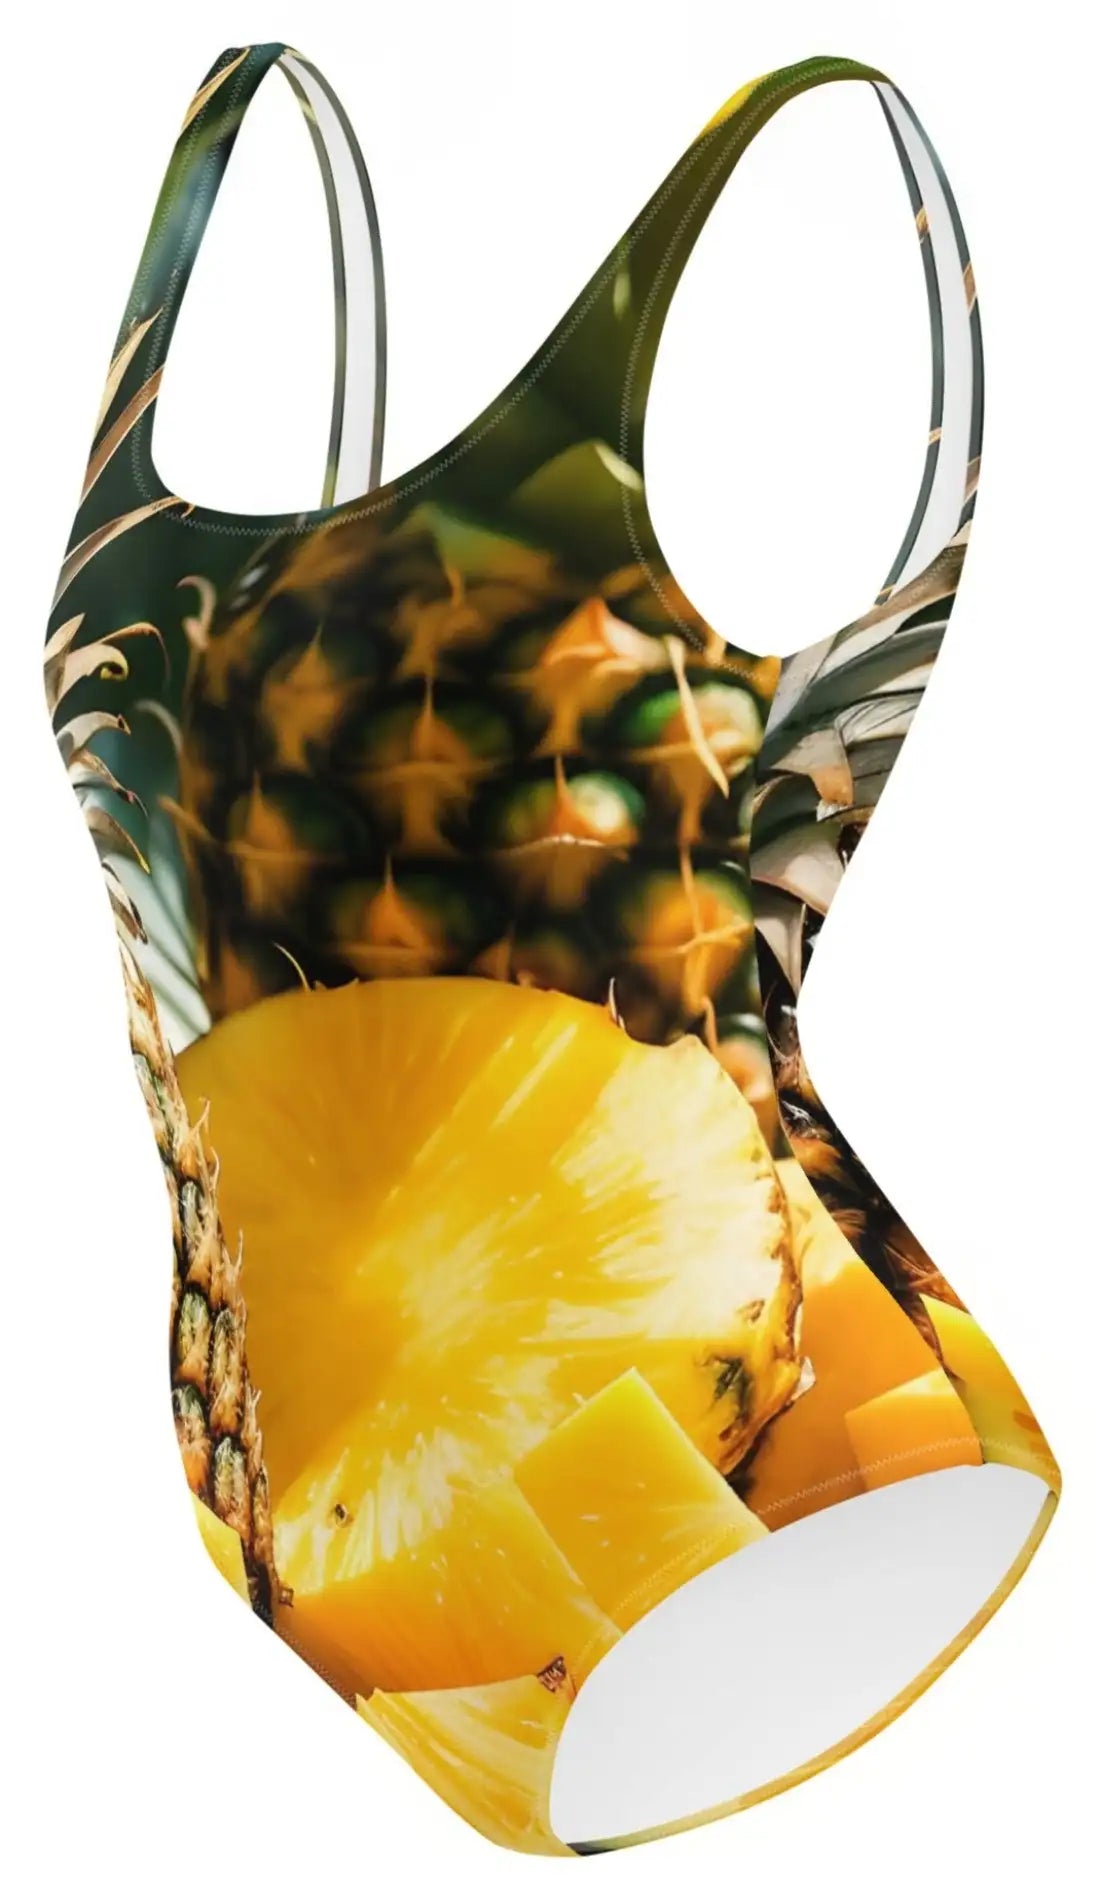 Tropical Delight: Pineapple Slice One-Piece Swimsuit